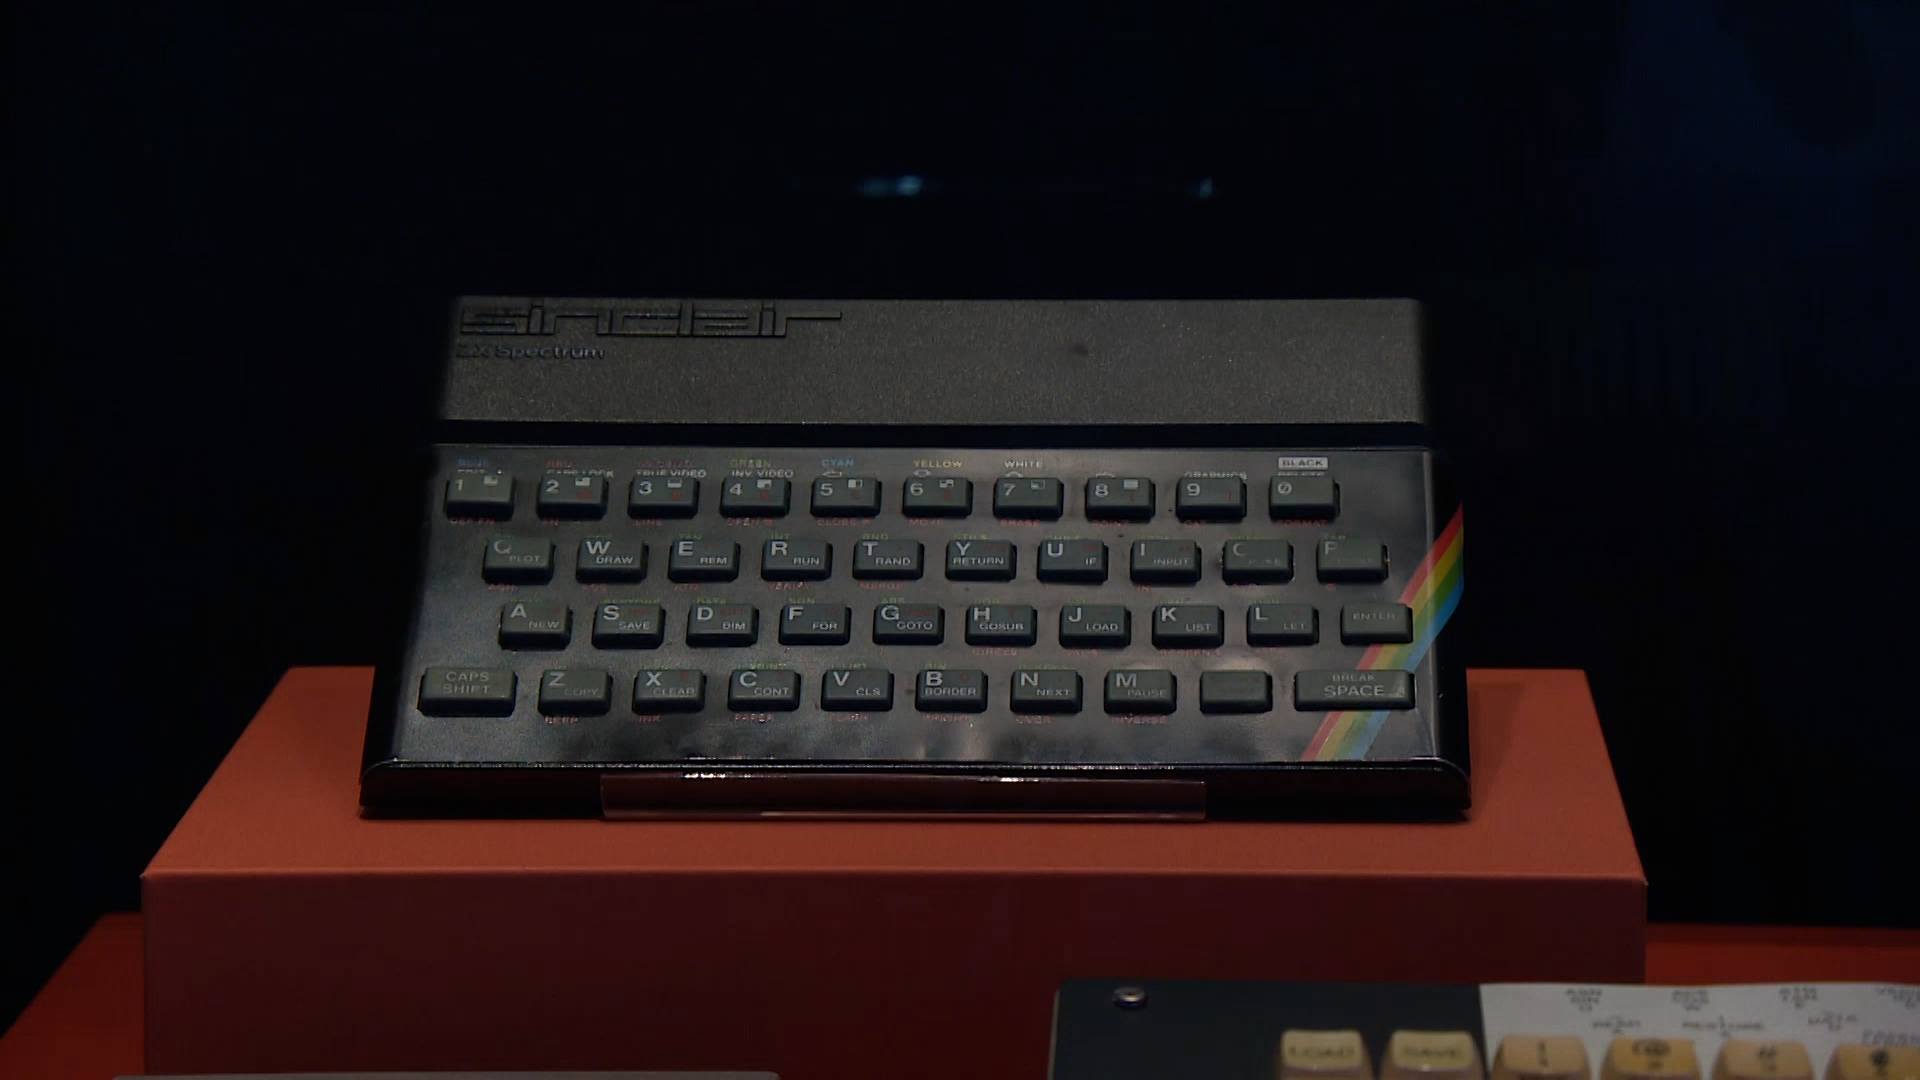 The legendary ZX Spectrum developed by the famous Sinclair Research was manufactured in Dundee.